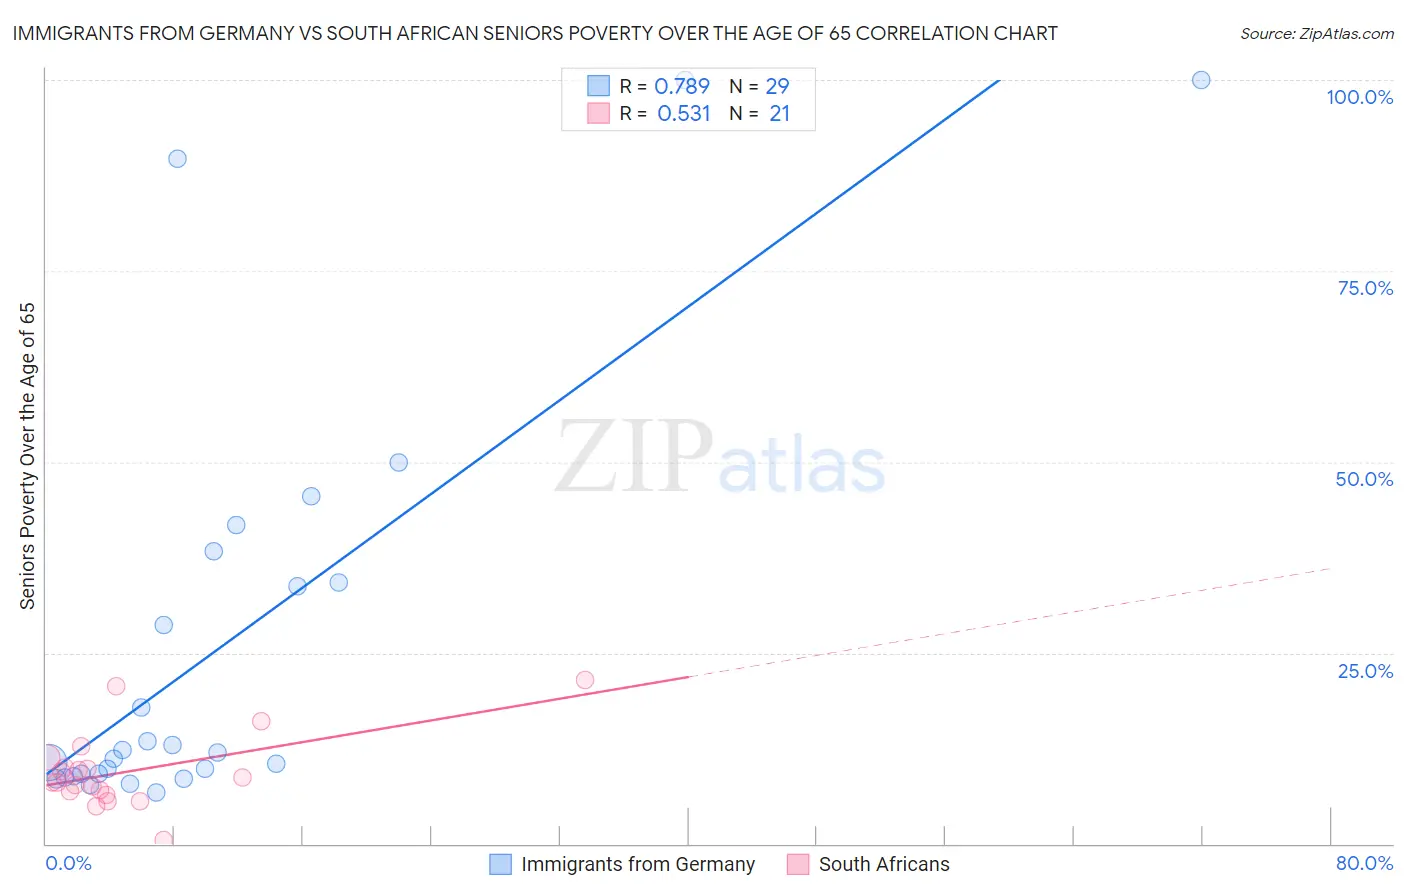 Immigrants from Germany vs South African Seniors Poverty Over the Age of 65